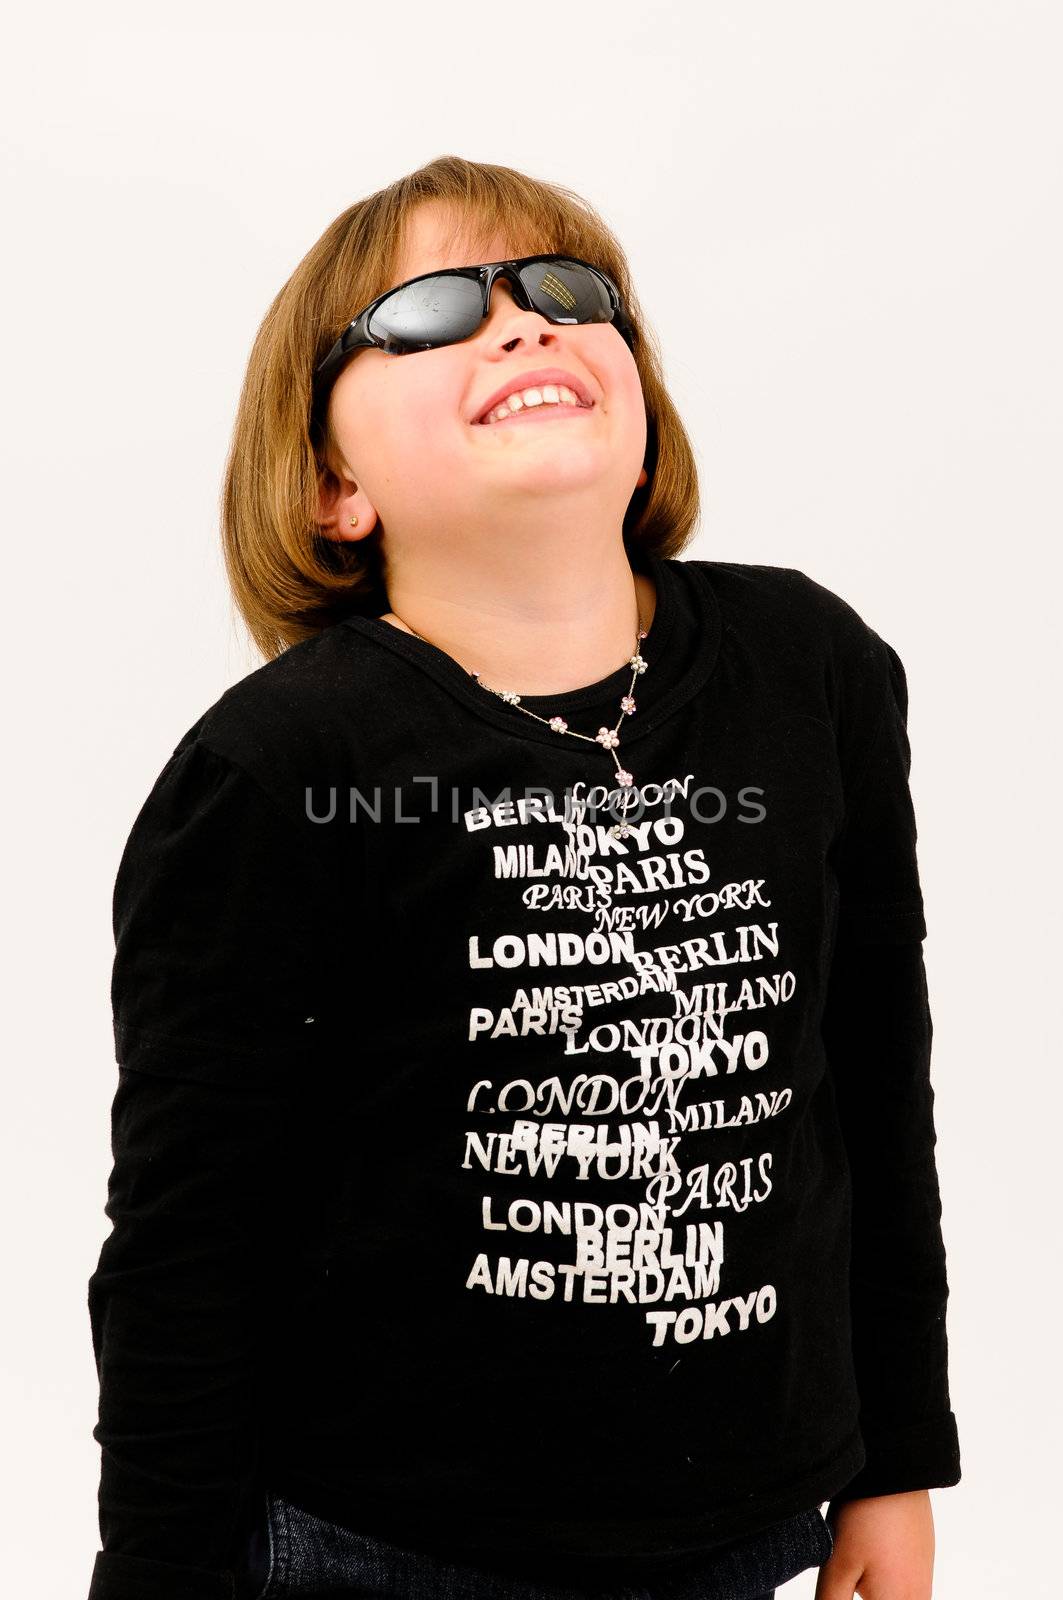 young beautiful  teenager with sun glasses smiling with dimple in cheek looking up